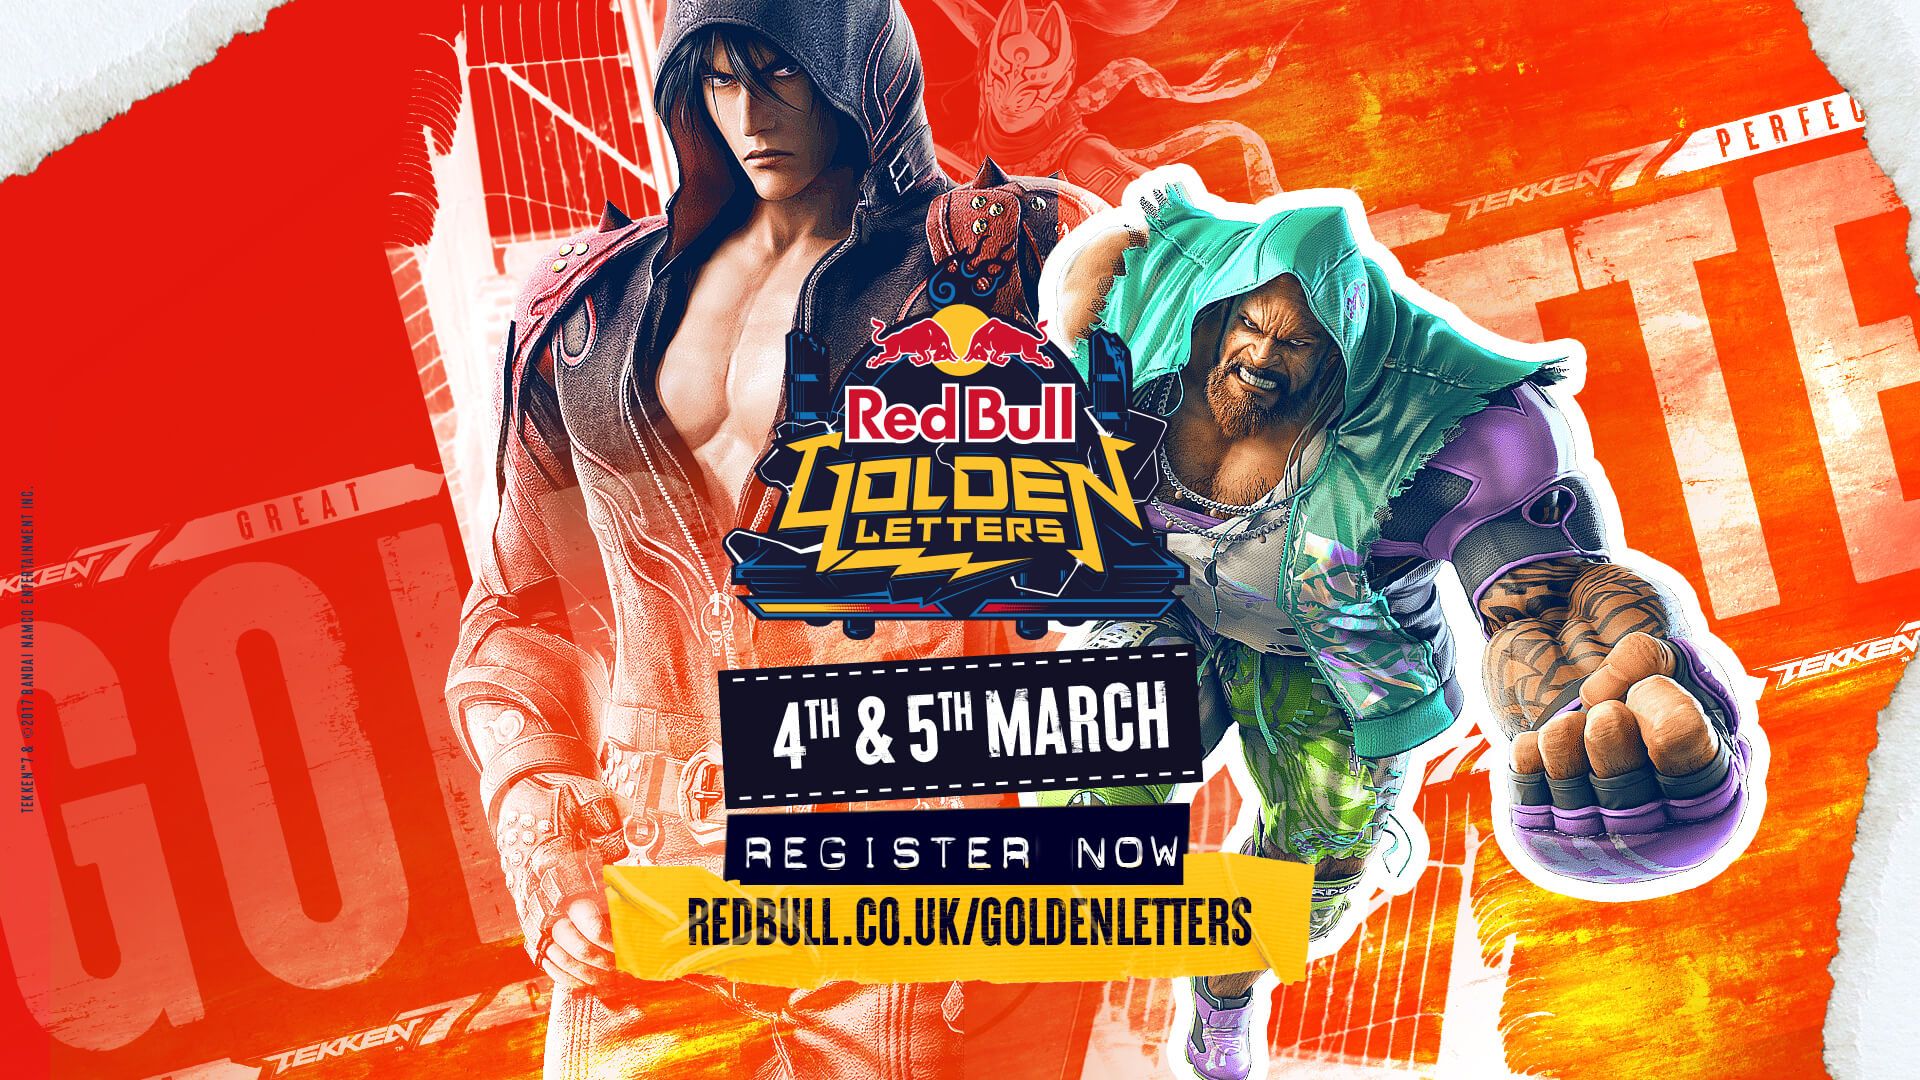 Red Bull Golden Letters Event Returns in March